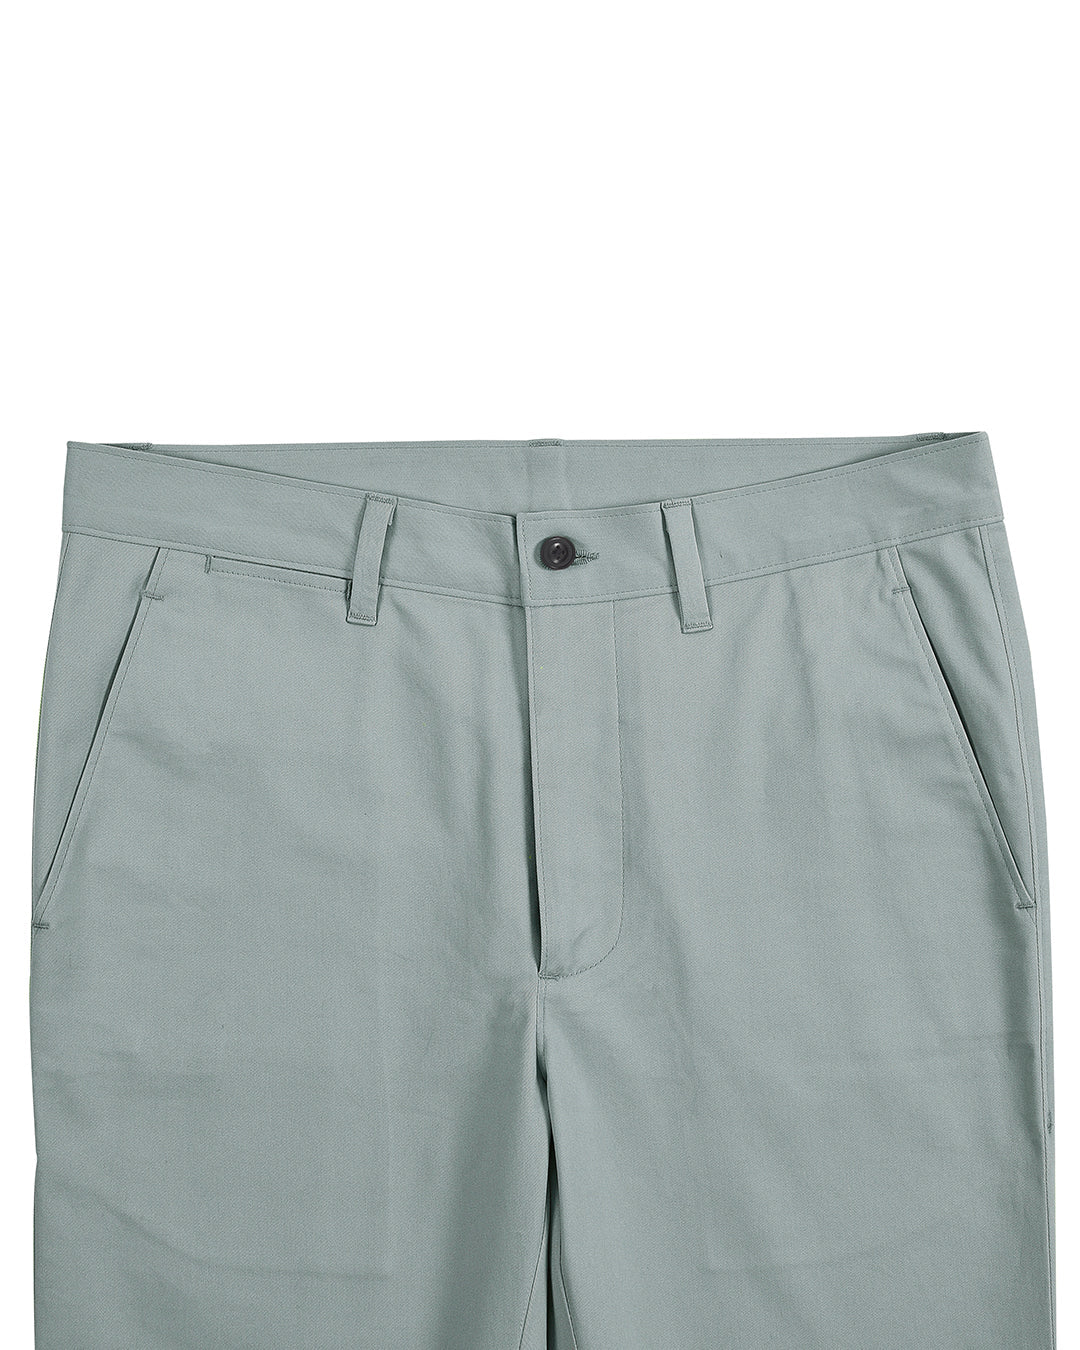 Front view of custom Genoa Chino pants for men by Luxire in sage green